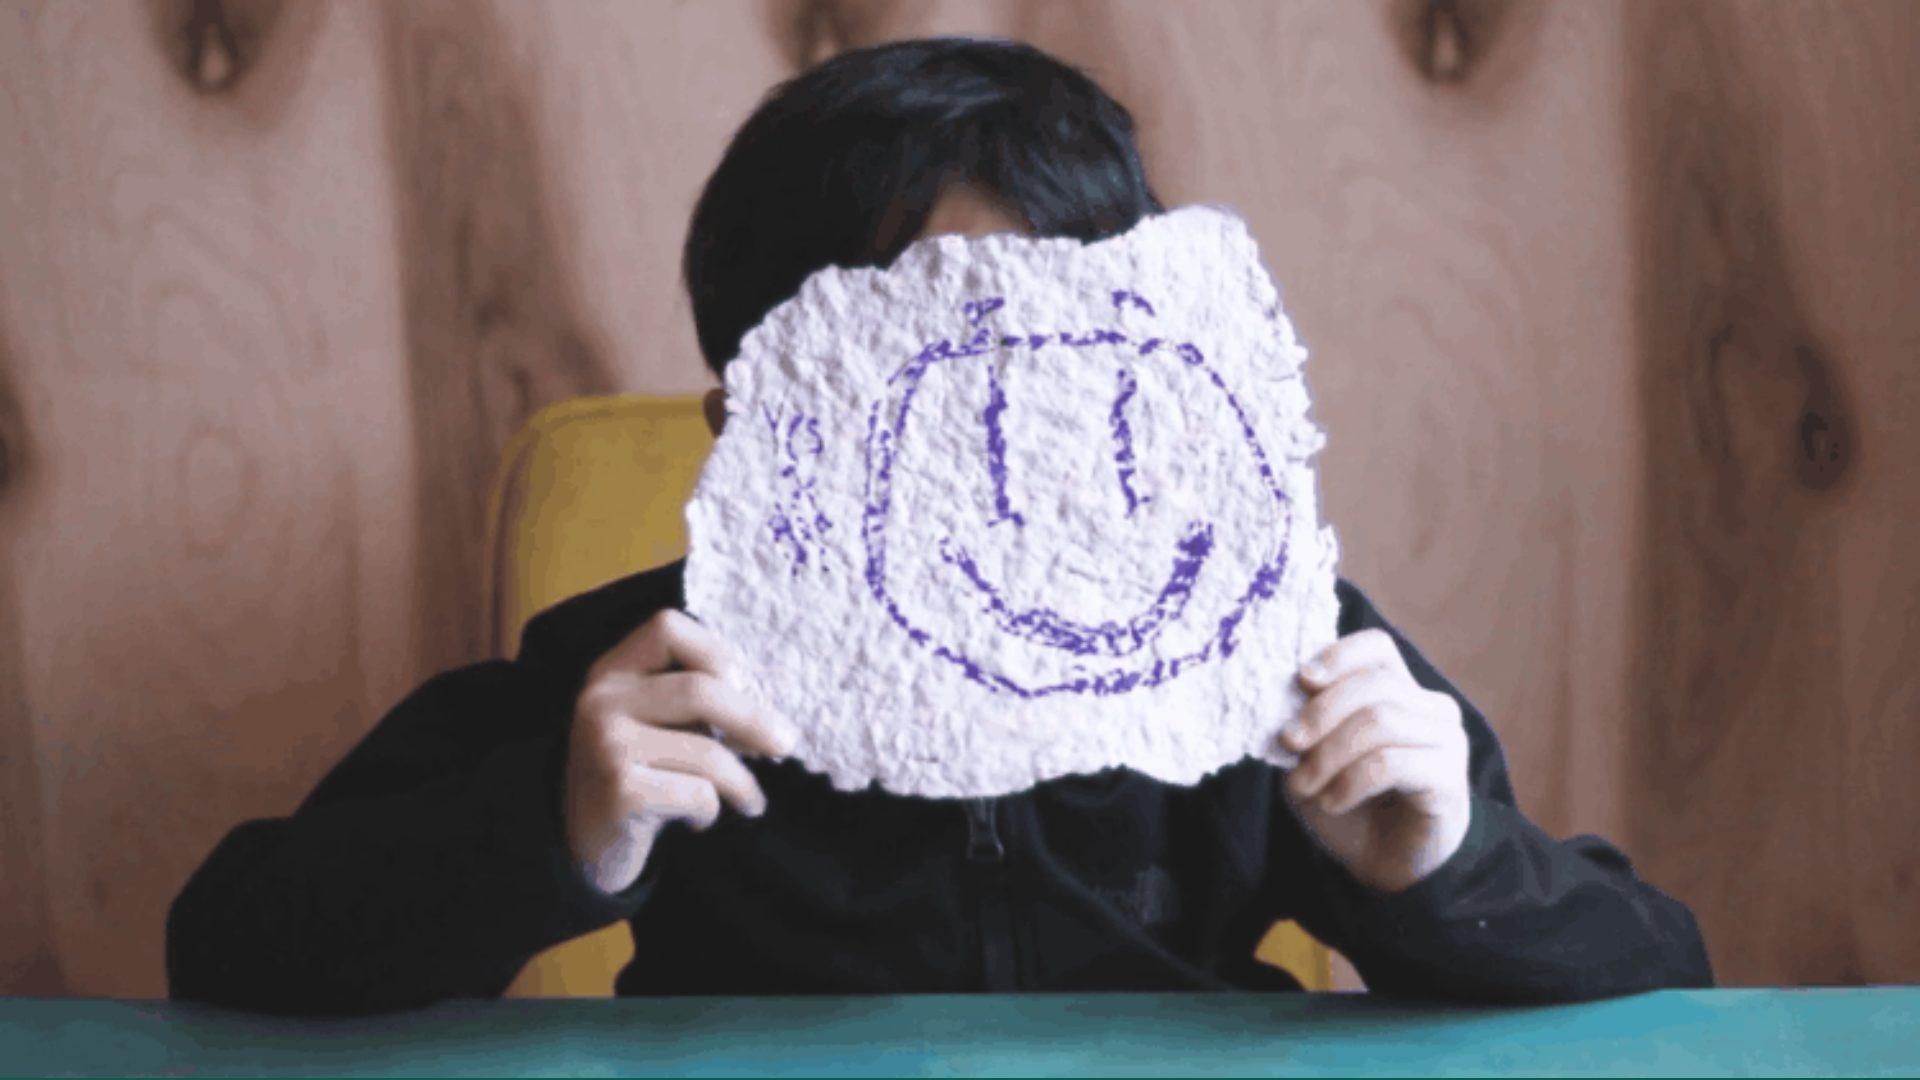 A child with black hair holding up homemade paper to cover their face, with a purple drawn smiley face on it.